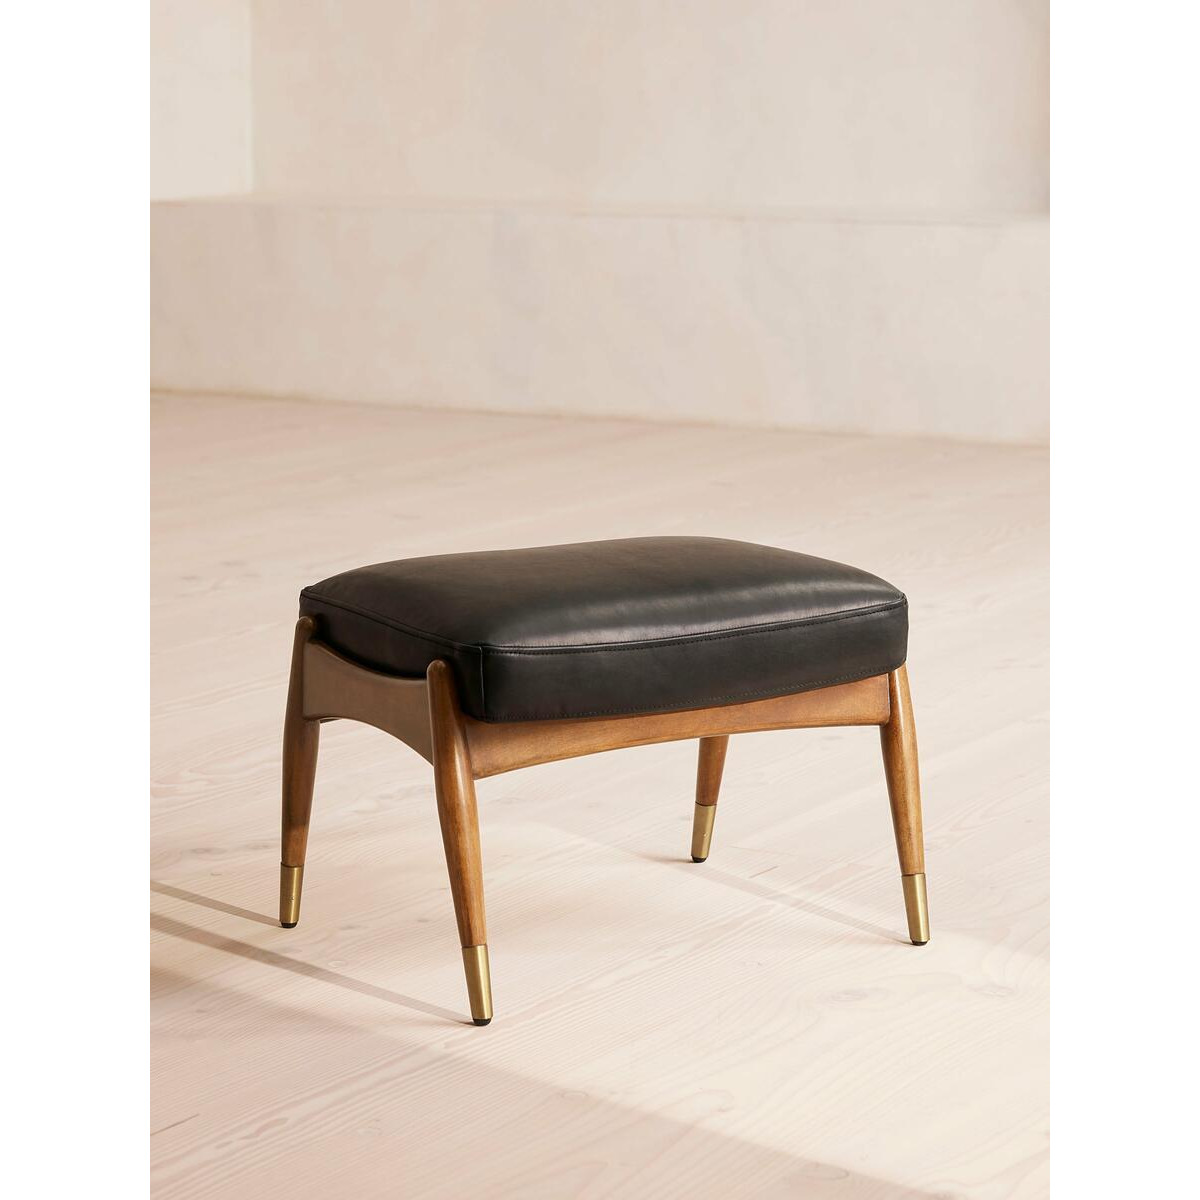 Theodore Leather Footstool in Black | Vintage-Inspired Design